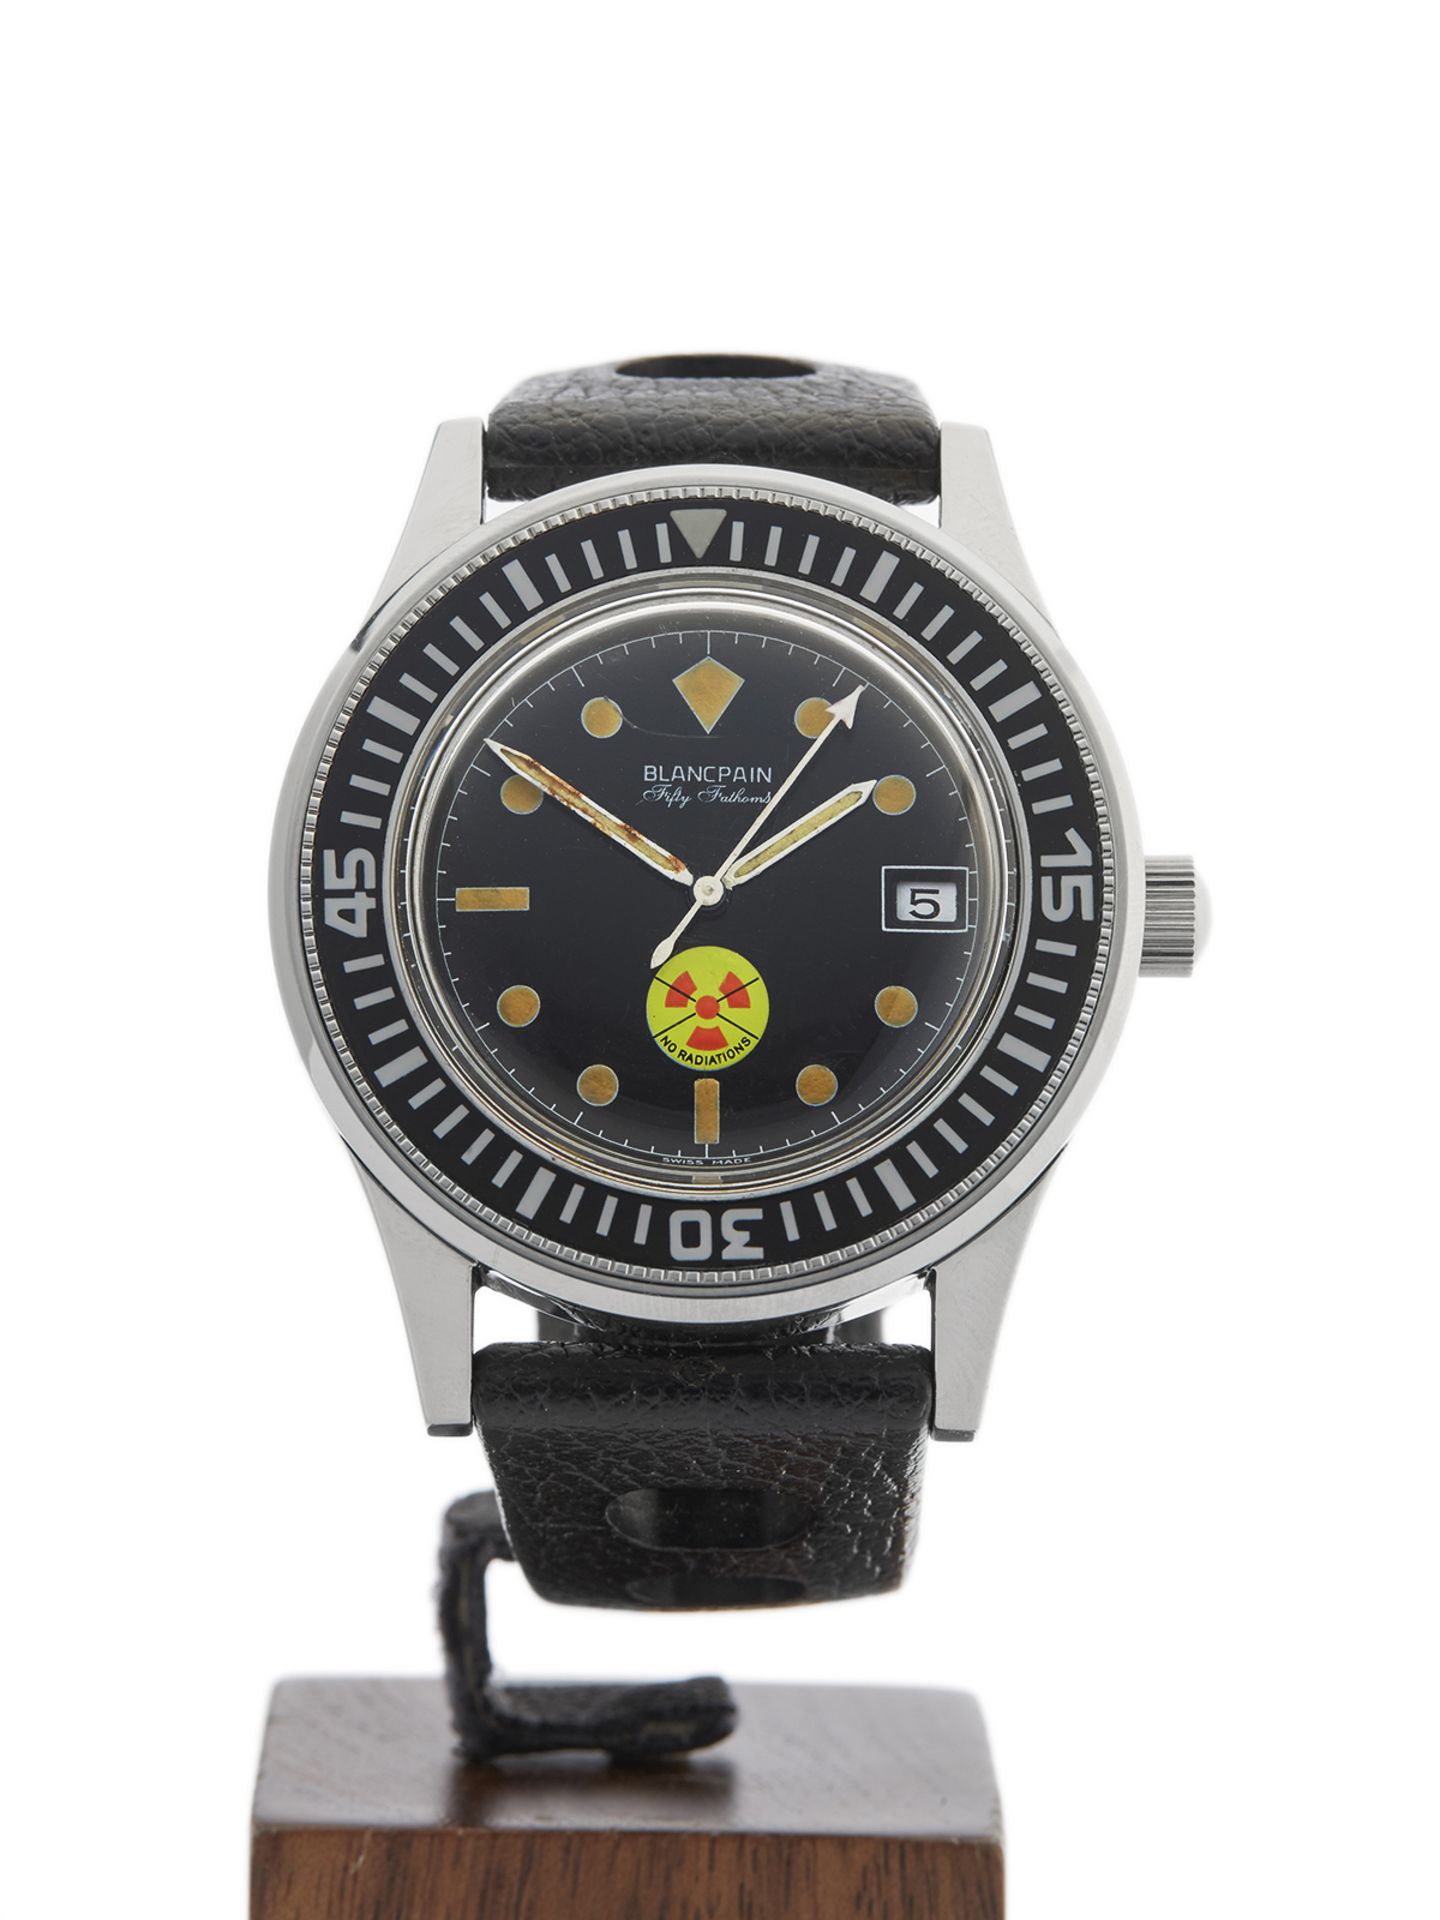 Blancpain Fifty Fathoms No Radiation 36mm Stainless Steel 206226